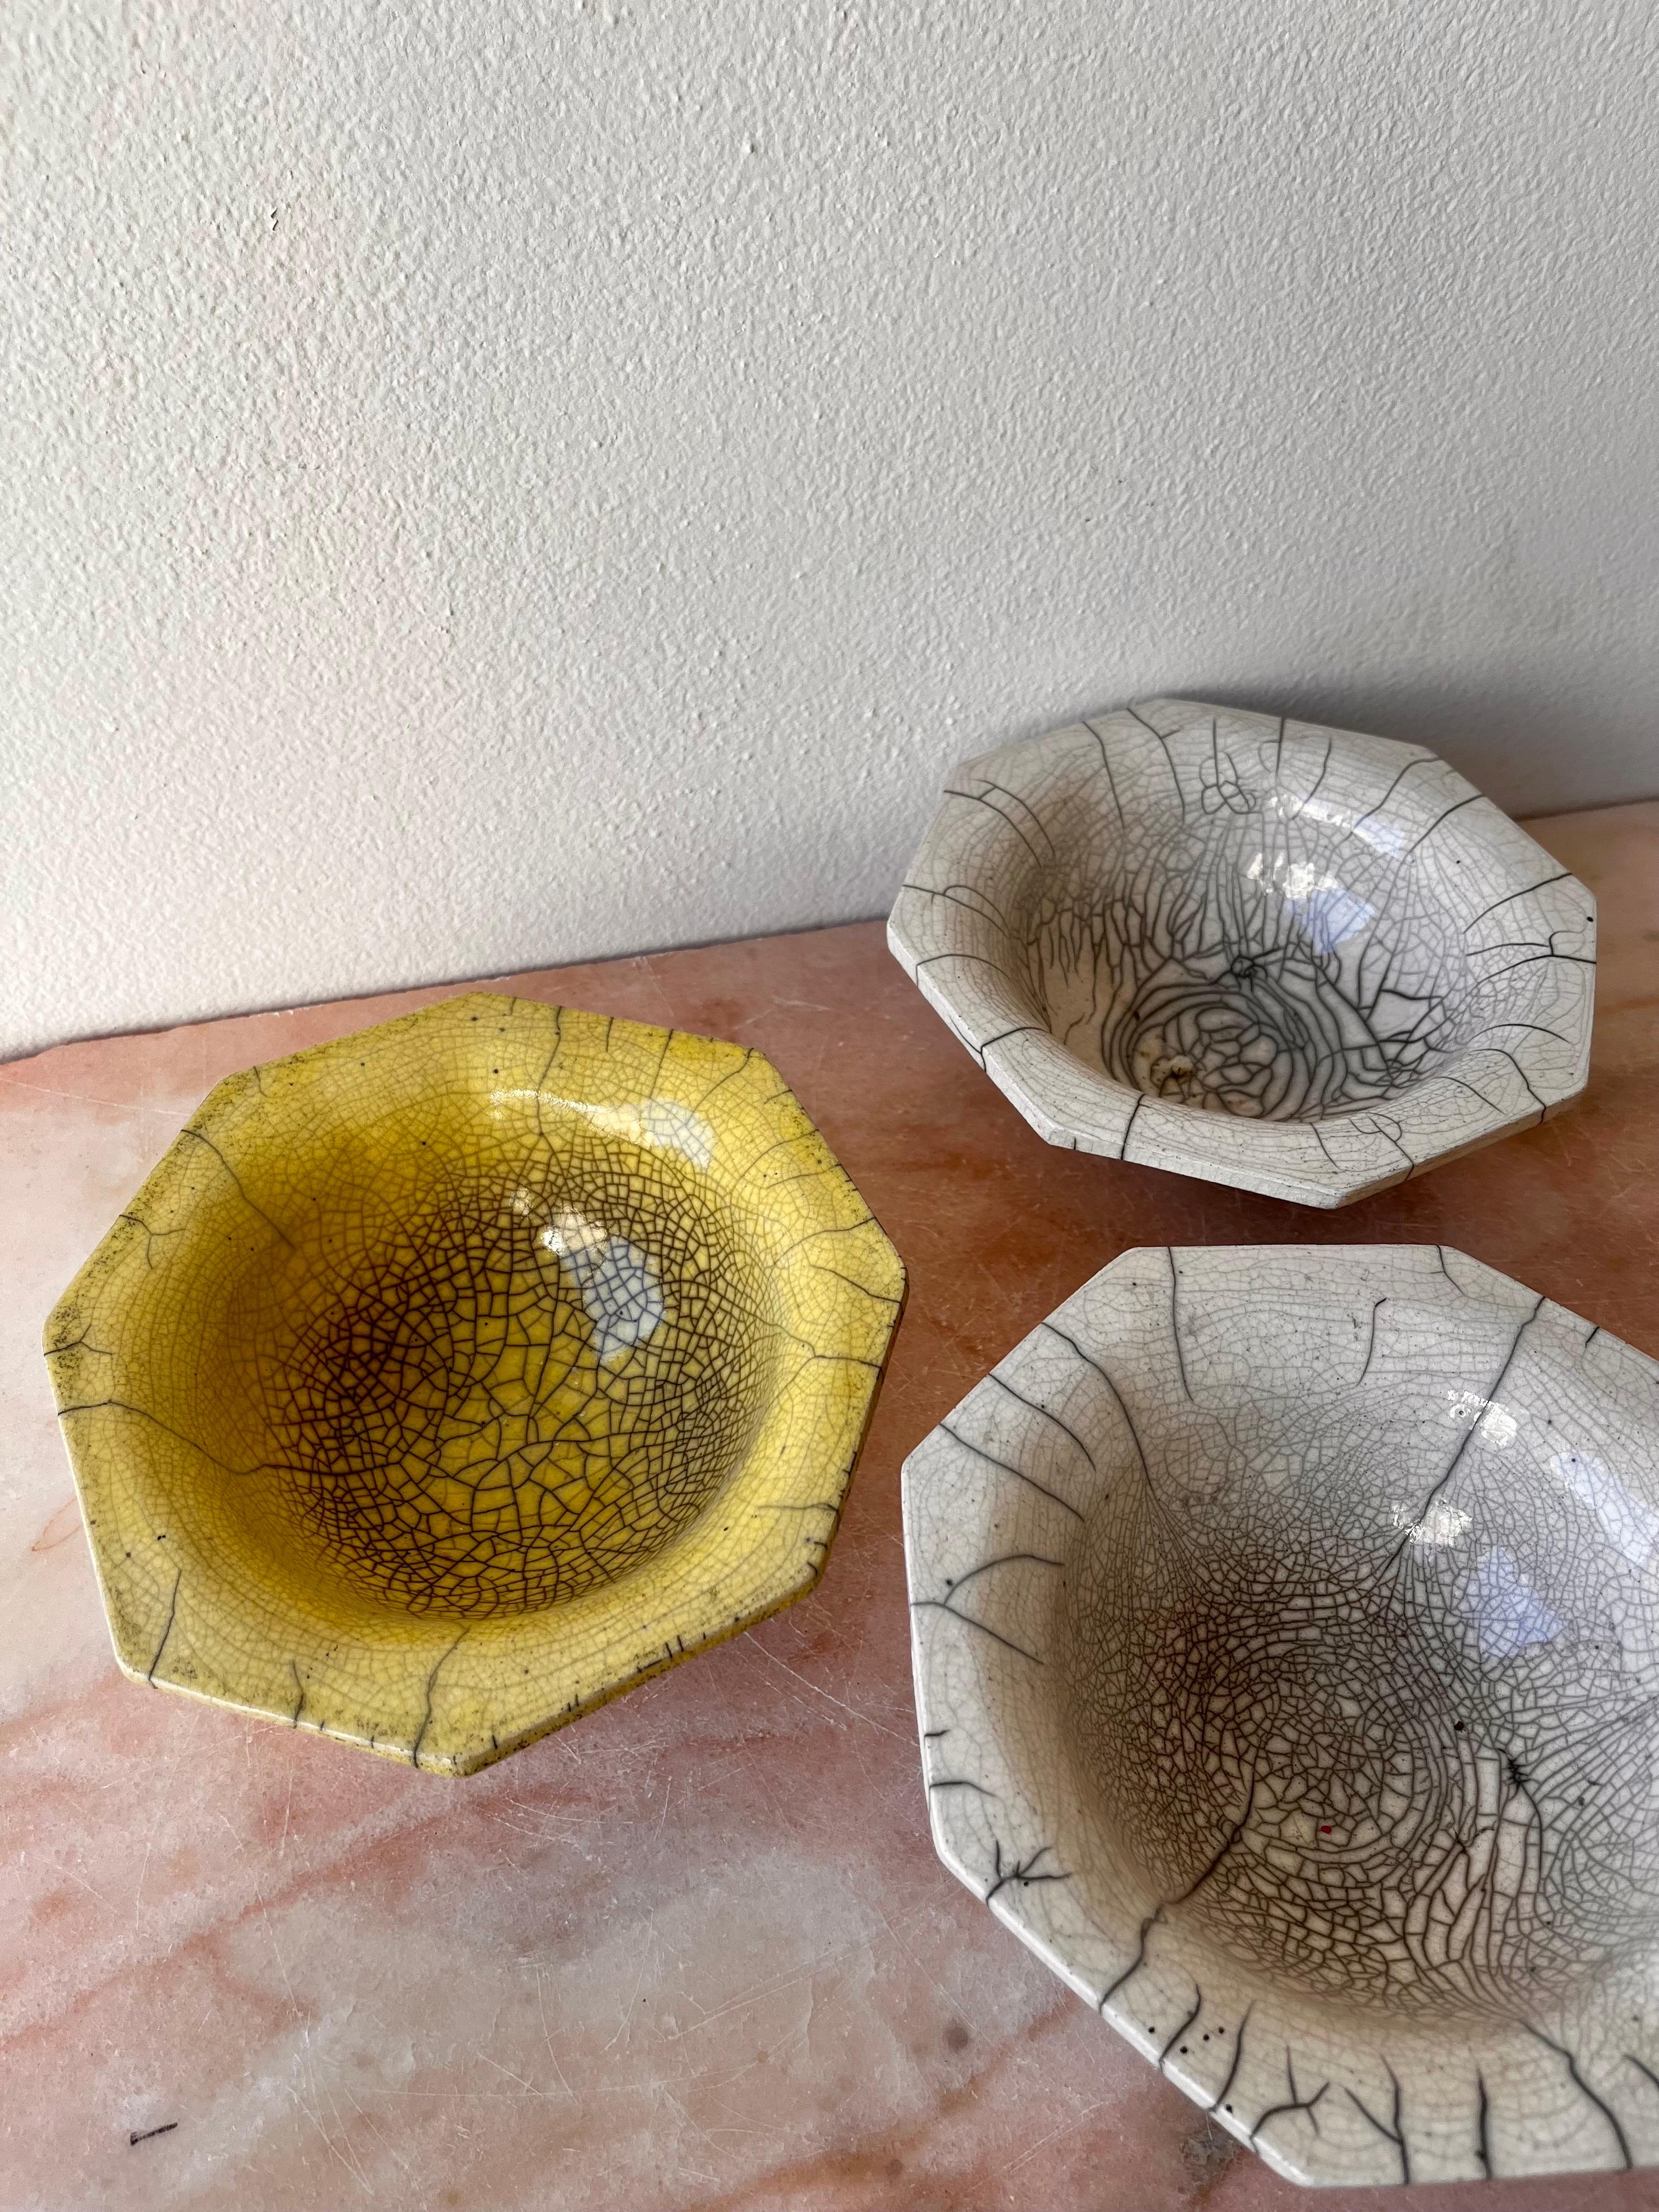 Decorative bowls fired in the traditional Japanese Raku method, with yellow or white smoke-stained crackle glaze.

Octagonal or square rim. Not food-safe.